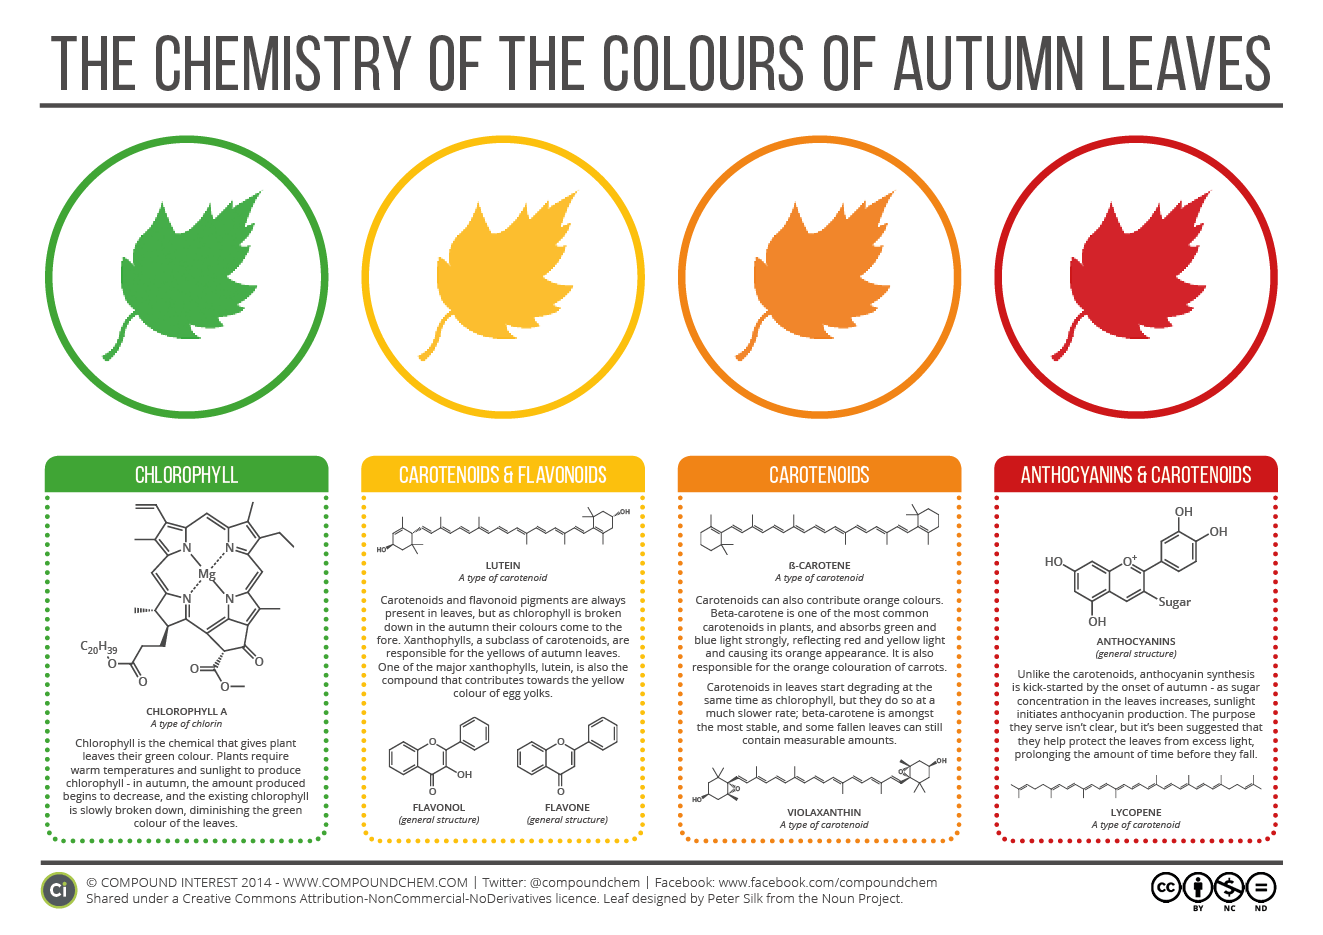 Why Leaves Change Color in the Fall | The Student ...